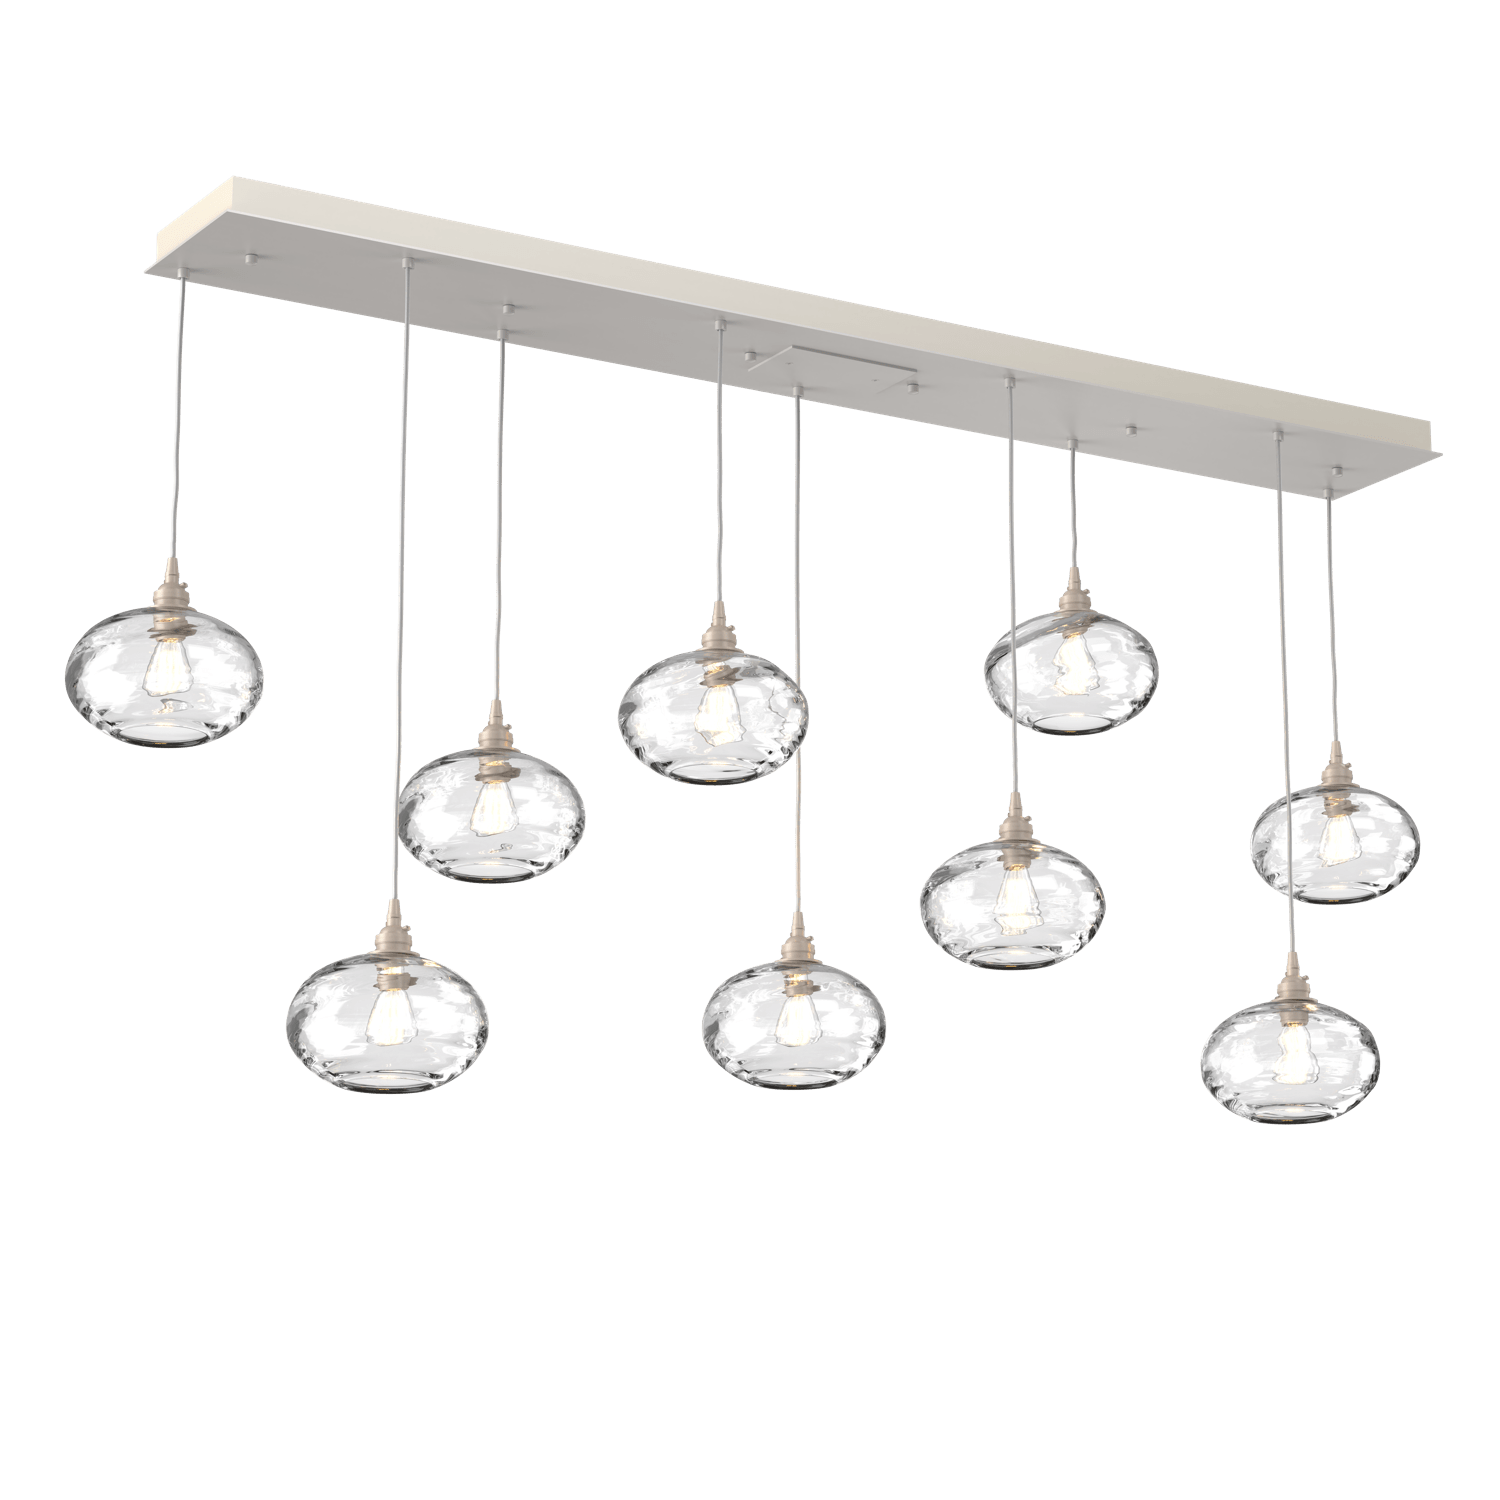 PLB0036-09-BS-OC-Hammerton-Studio-Optic-Blown-Glass-Coppa-9-light-linear-pendant-chandelier-with-metallic-beige-silver-finish-and-optic-clear-blown-glass-shades-and-incandescent-lamping